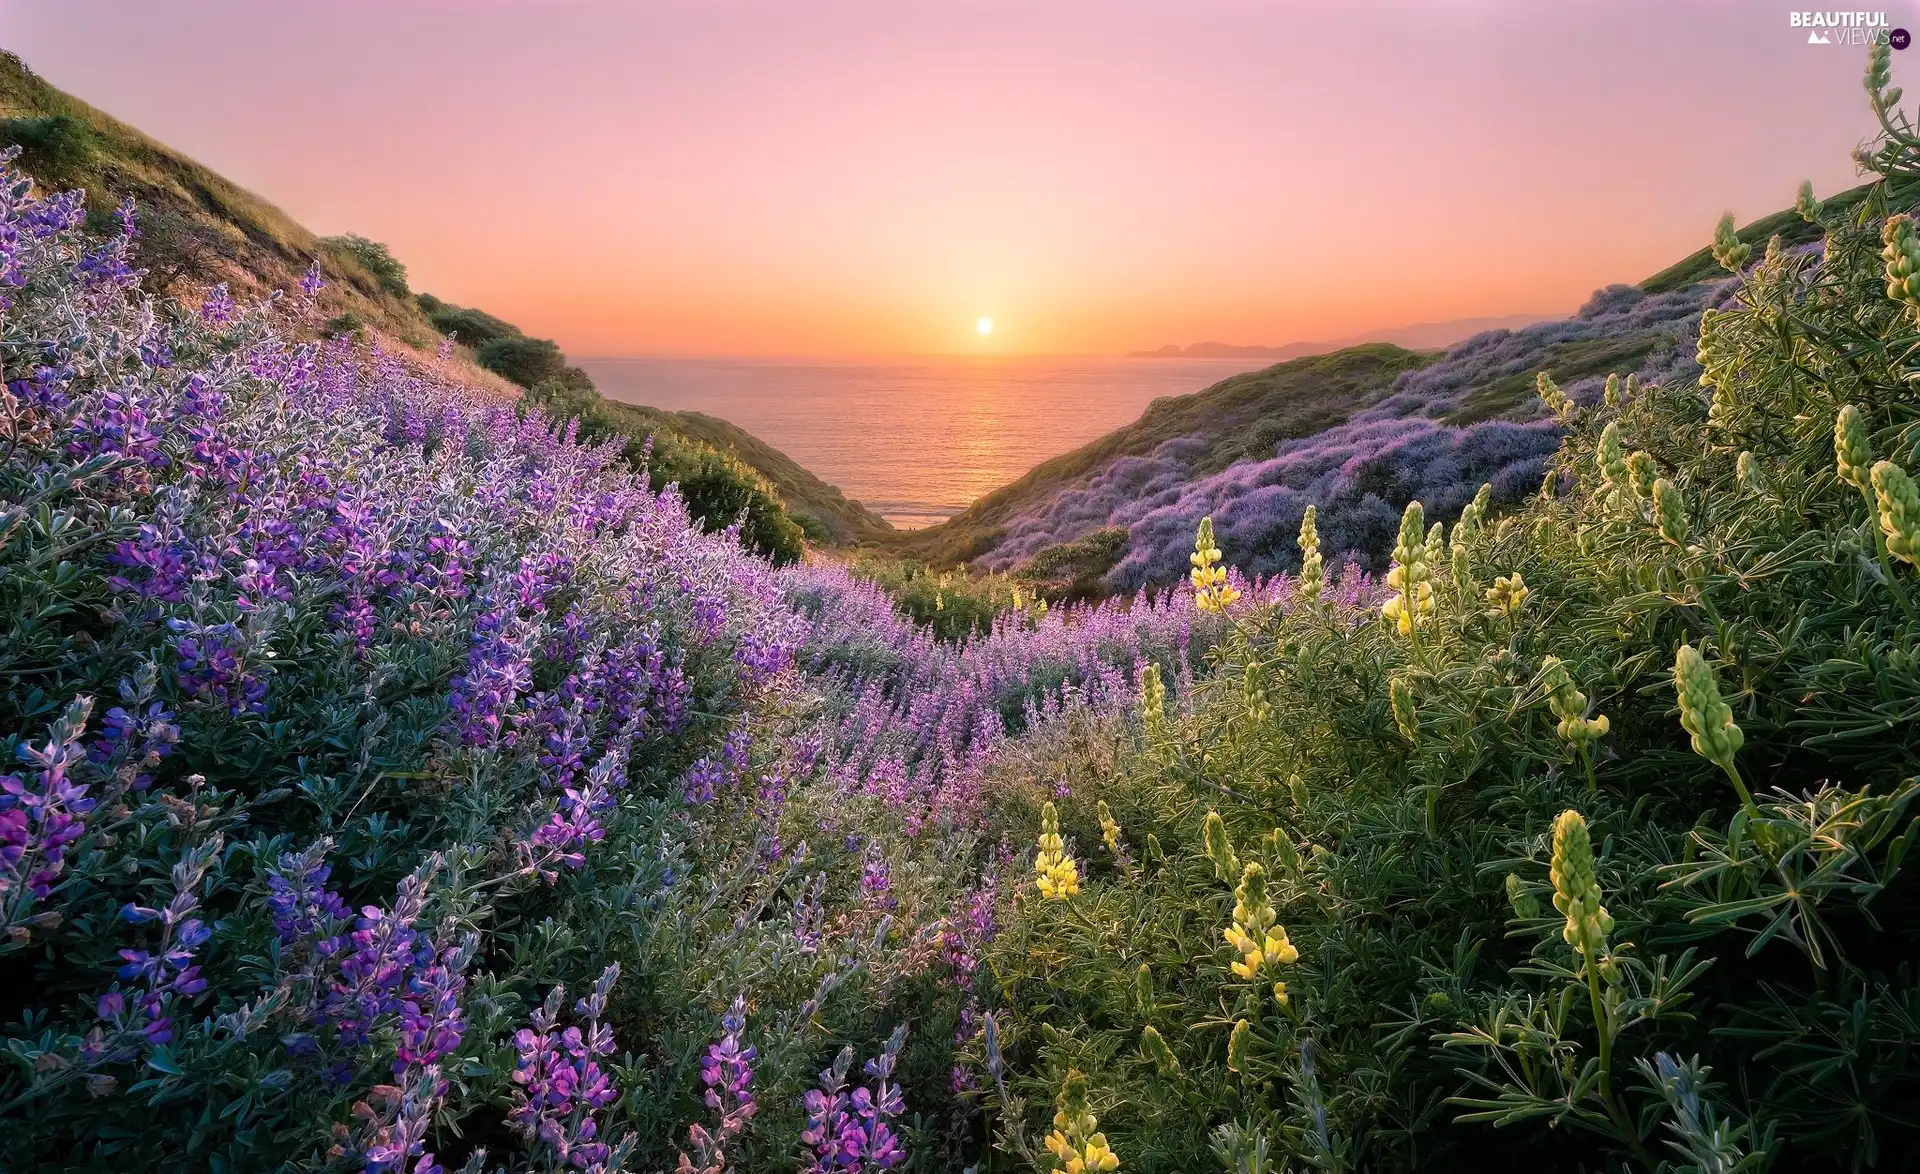 State of California, The United States, San Francisco, Coastal Trail, sea, The Hills, lupine, Great Sunsets, Flowers